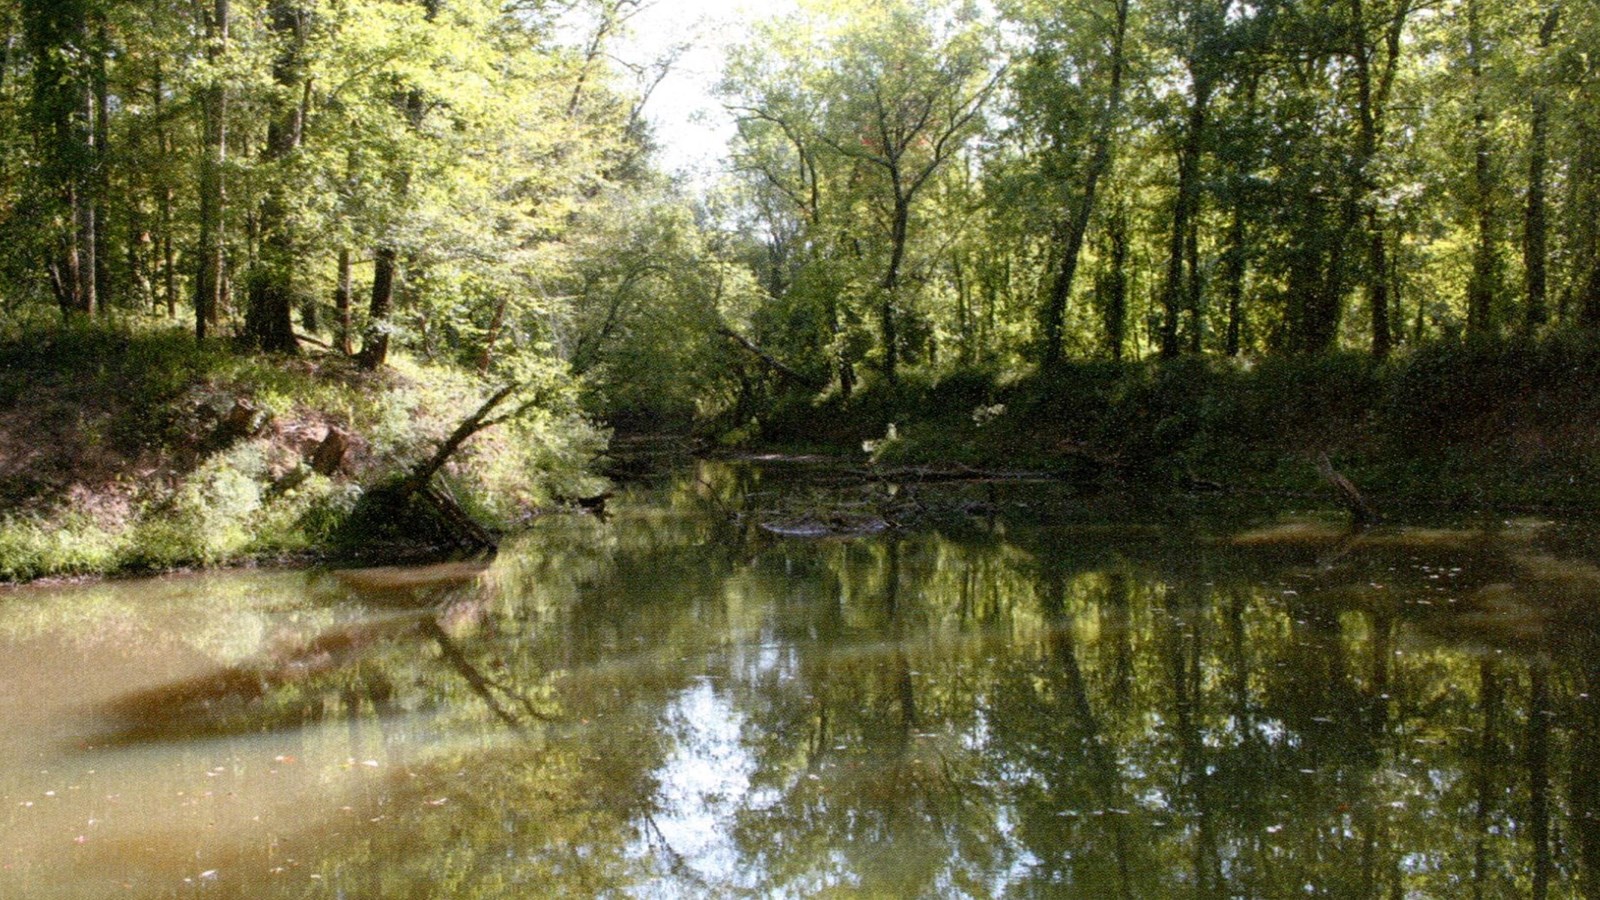 Image of a body of water, flanked by trees